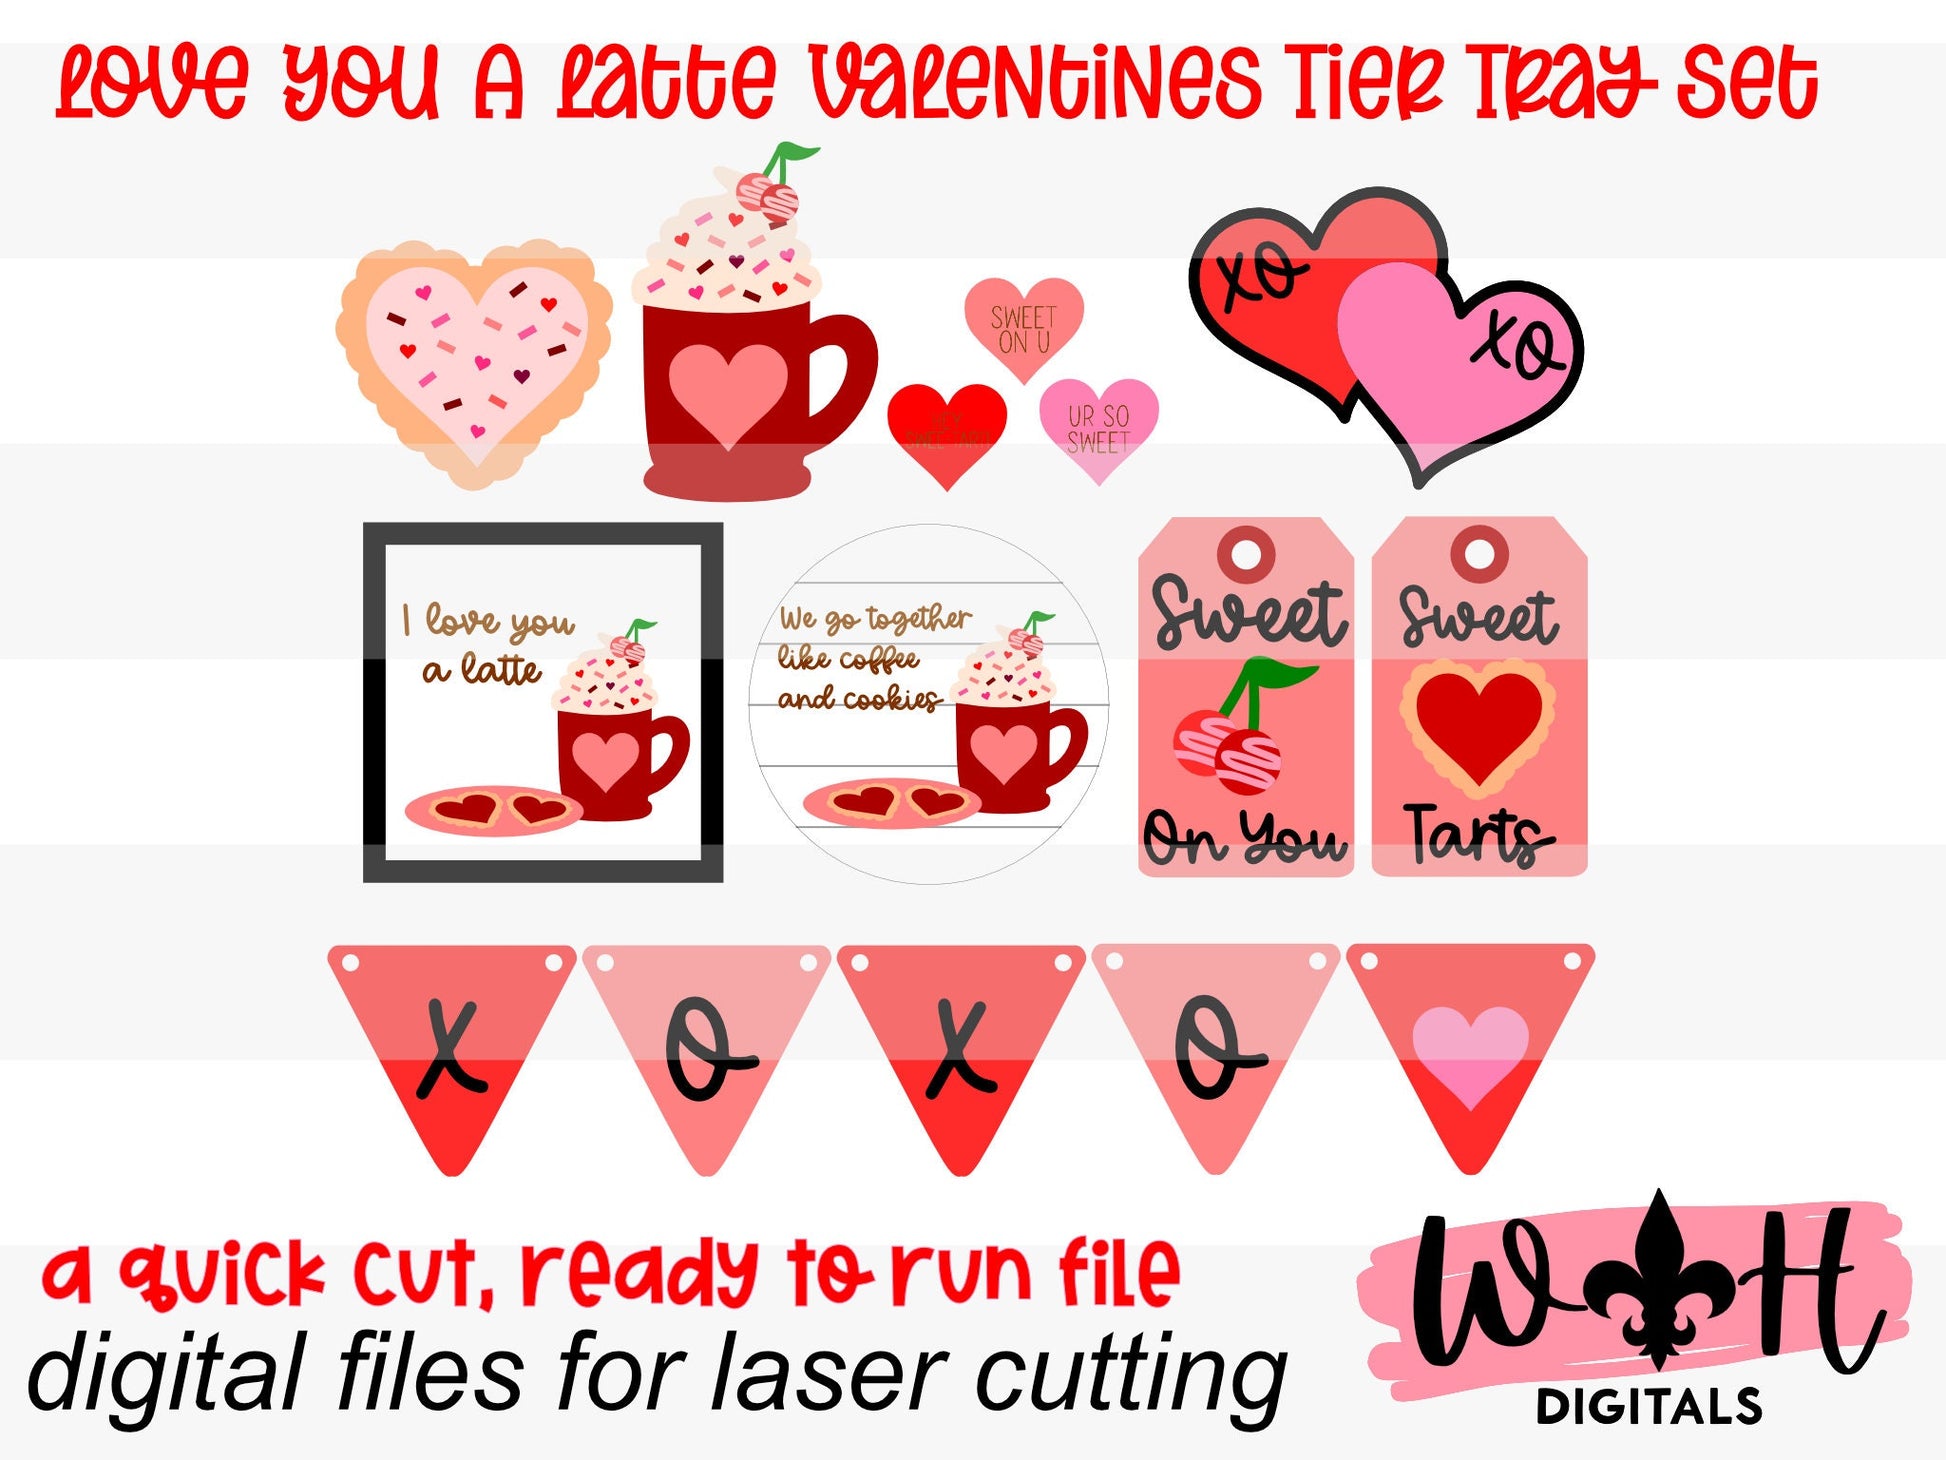 Valentine’s Day - Love You A Latte - Sweet Tart Diy Tier Tray Set - Files for Sign Making - SVG Cut File For Glowforge - Digital File